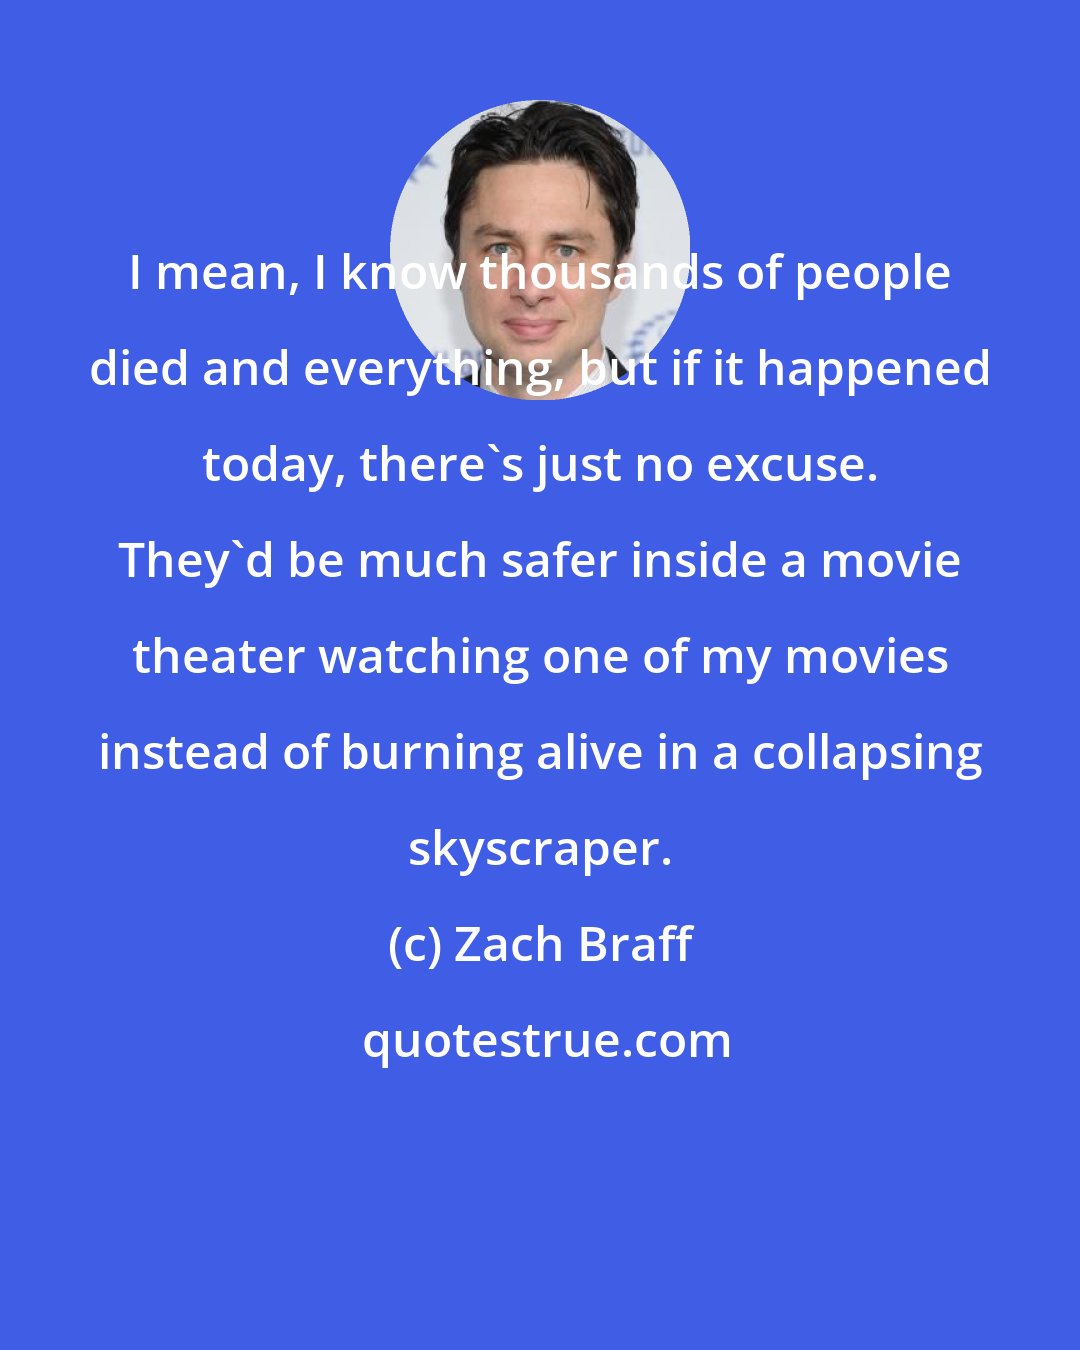 Zach Braff: I mean, I know thousands of people died and everything, but if it happened today, there's just no excuse. They'd be much safer inside a movie theater watching one of my movies instead of burning alive in a collapsing skyscraper.